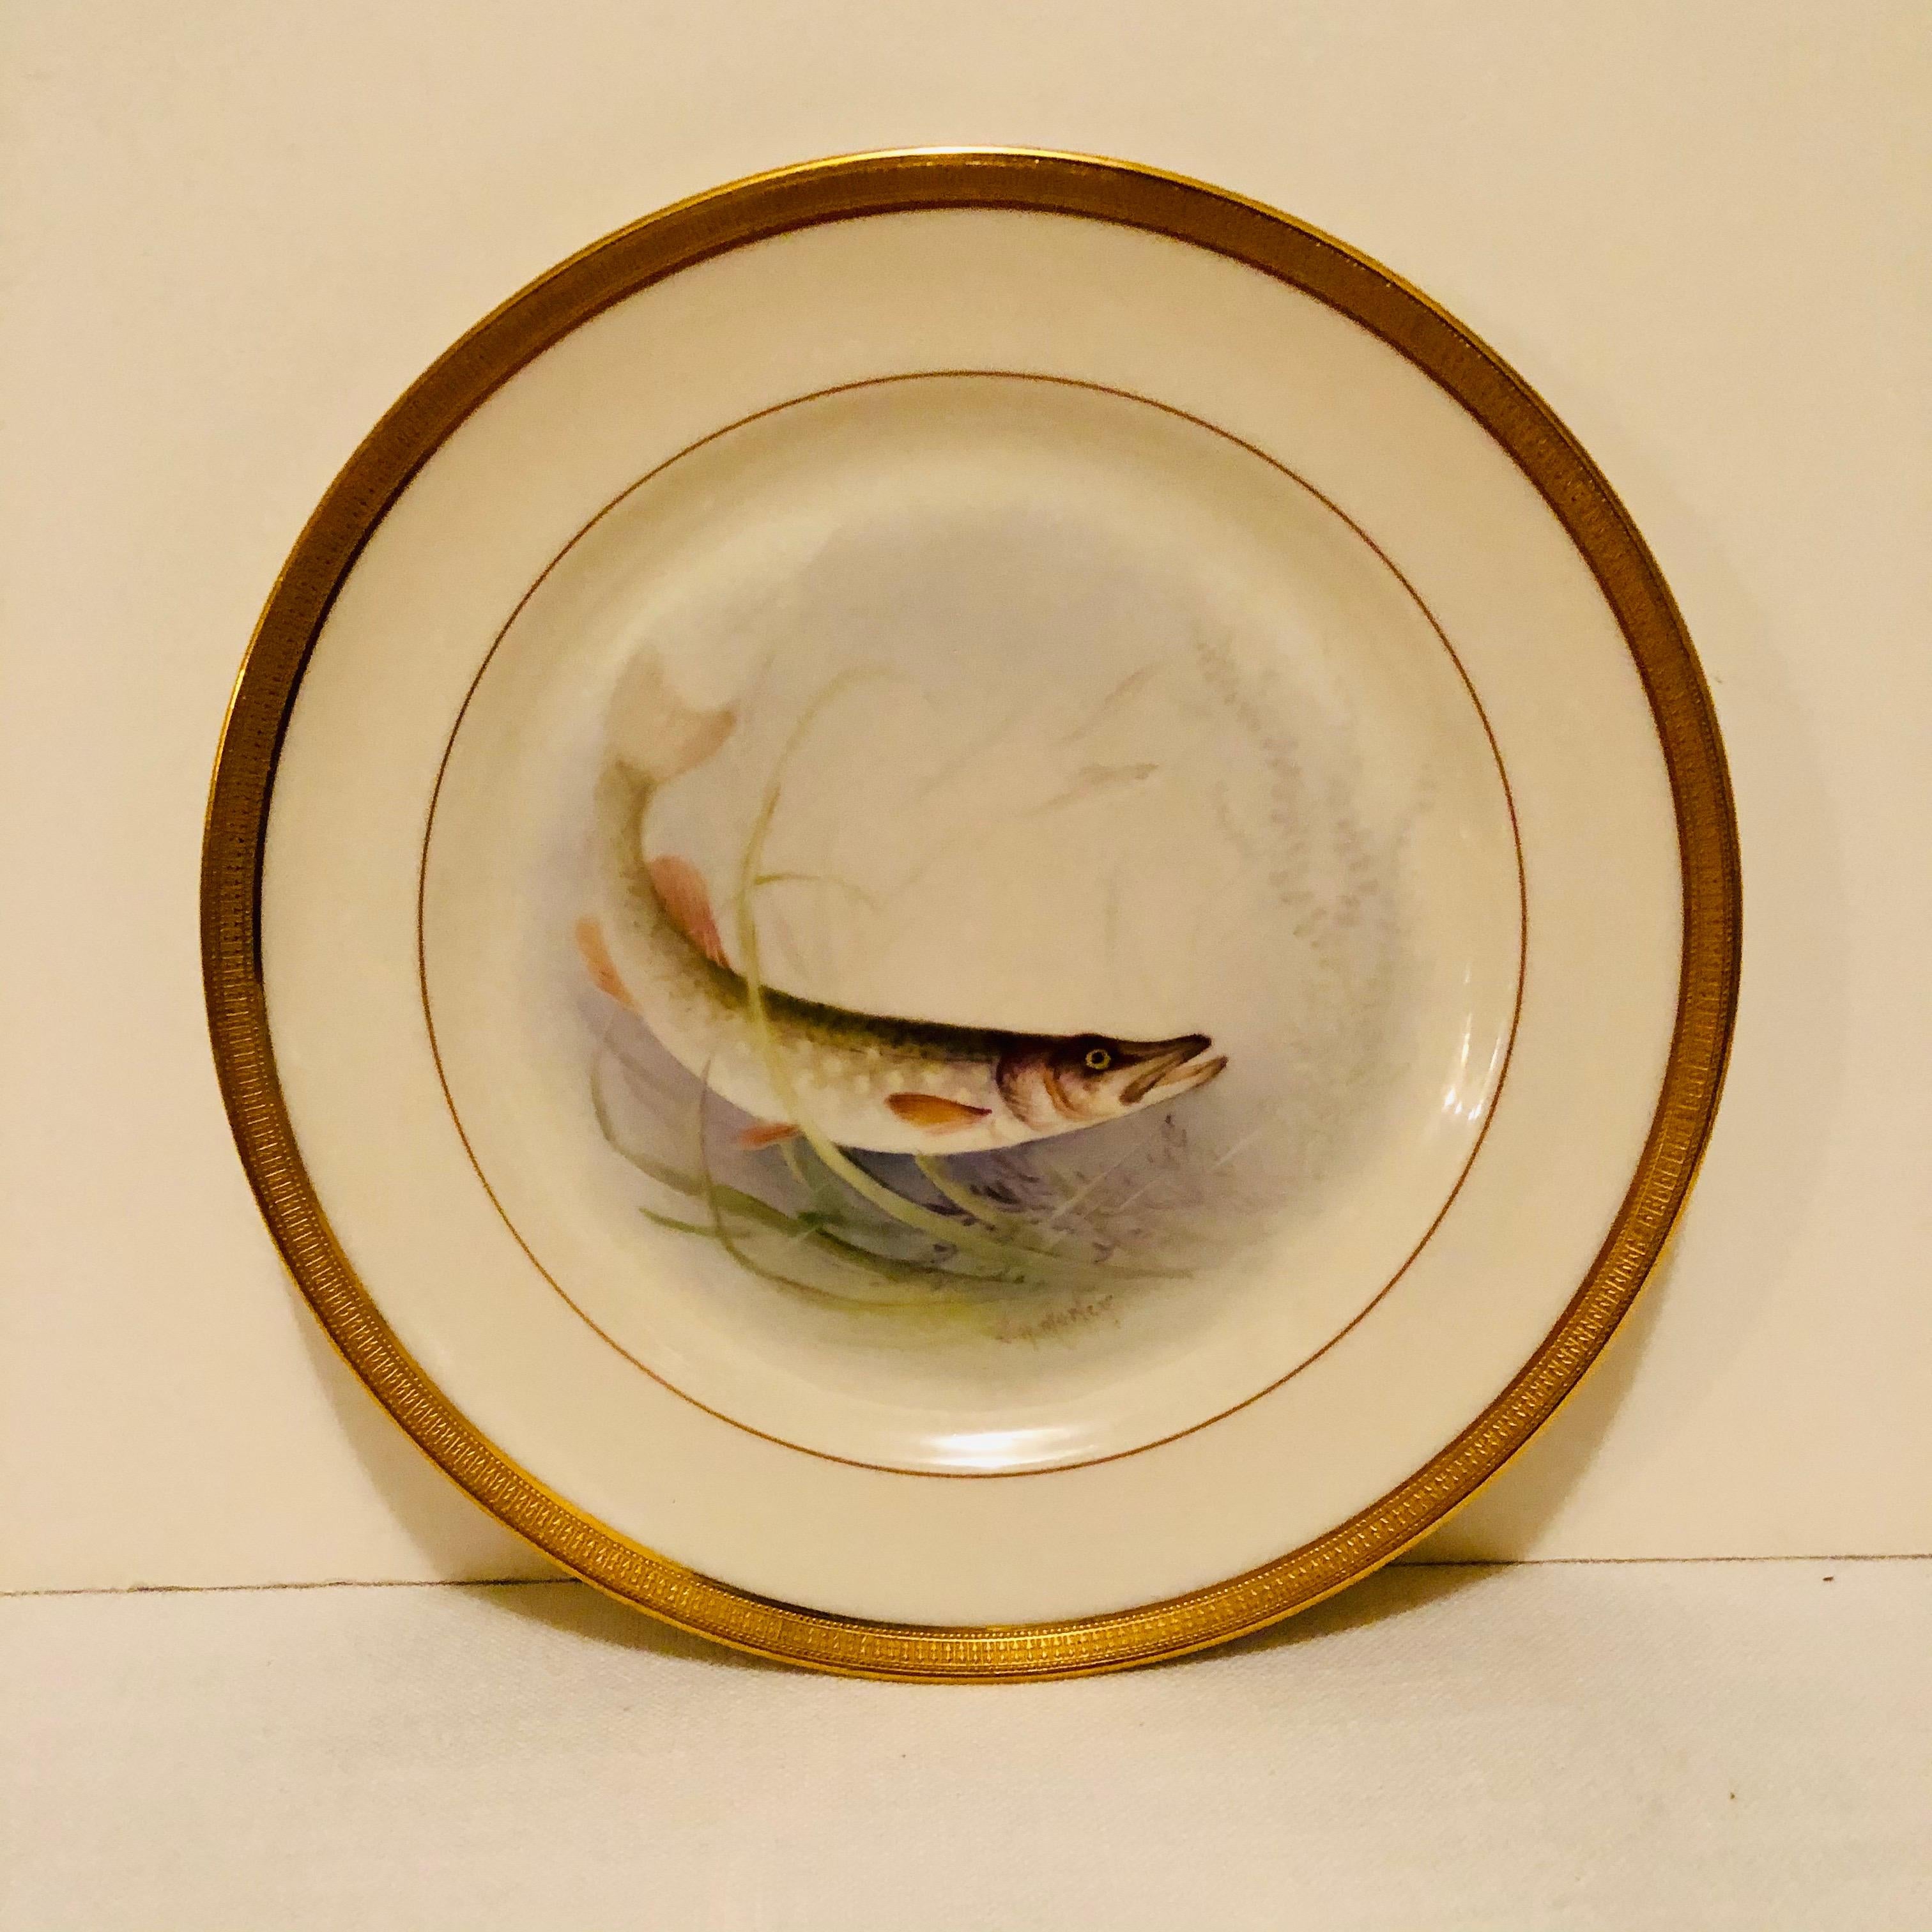 Set of Lenox Fish Plates Each Painted with Different Fish Artist Signed Morley 2